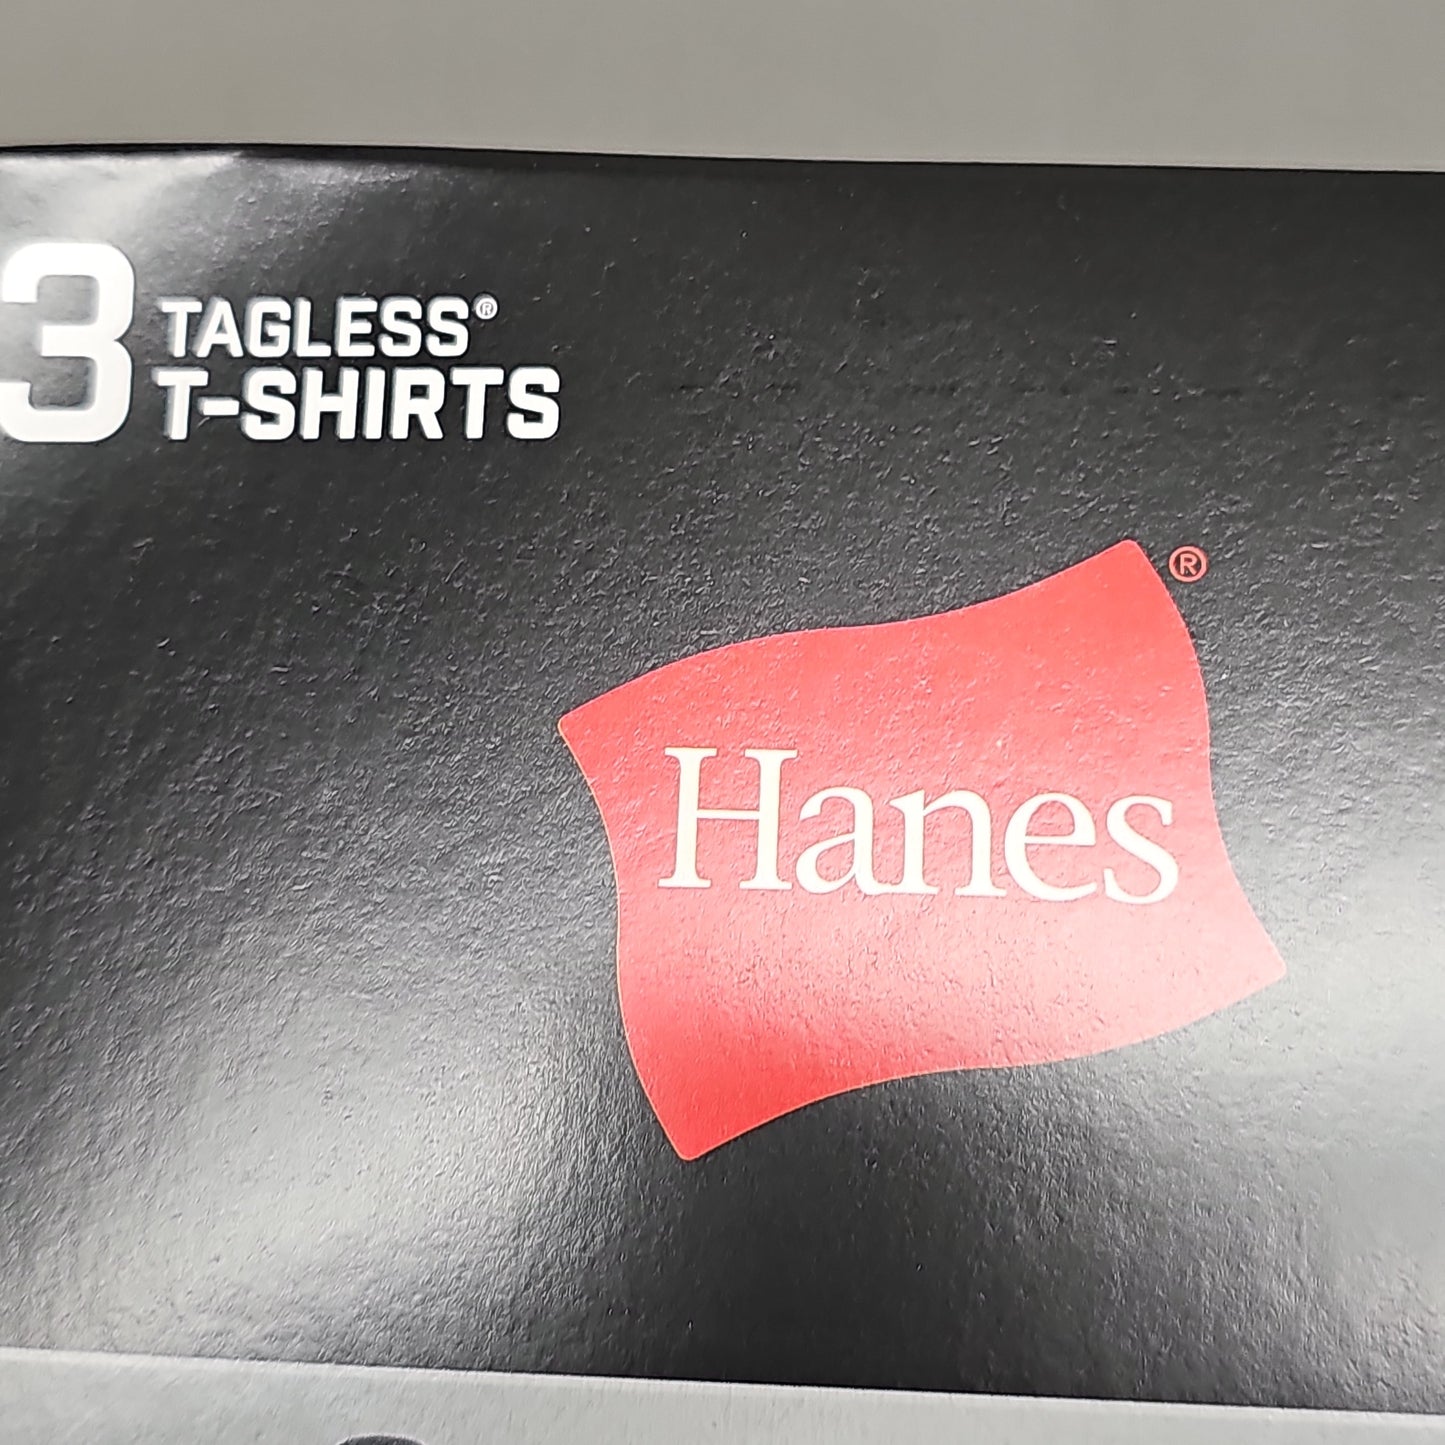 HANES Tagless T-Shirts Pack of 6 Men's Size XL 46-48" Black Grey CFFDC3 (New)